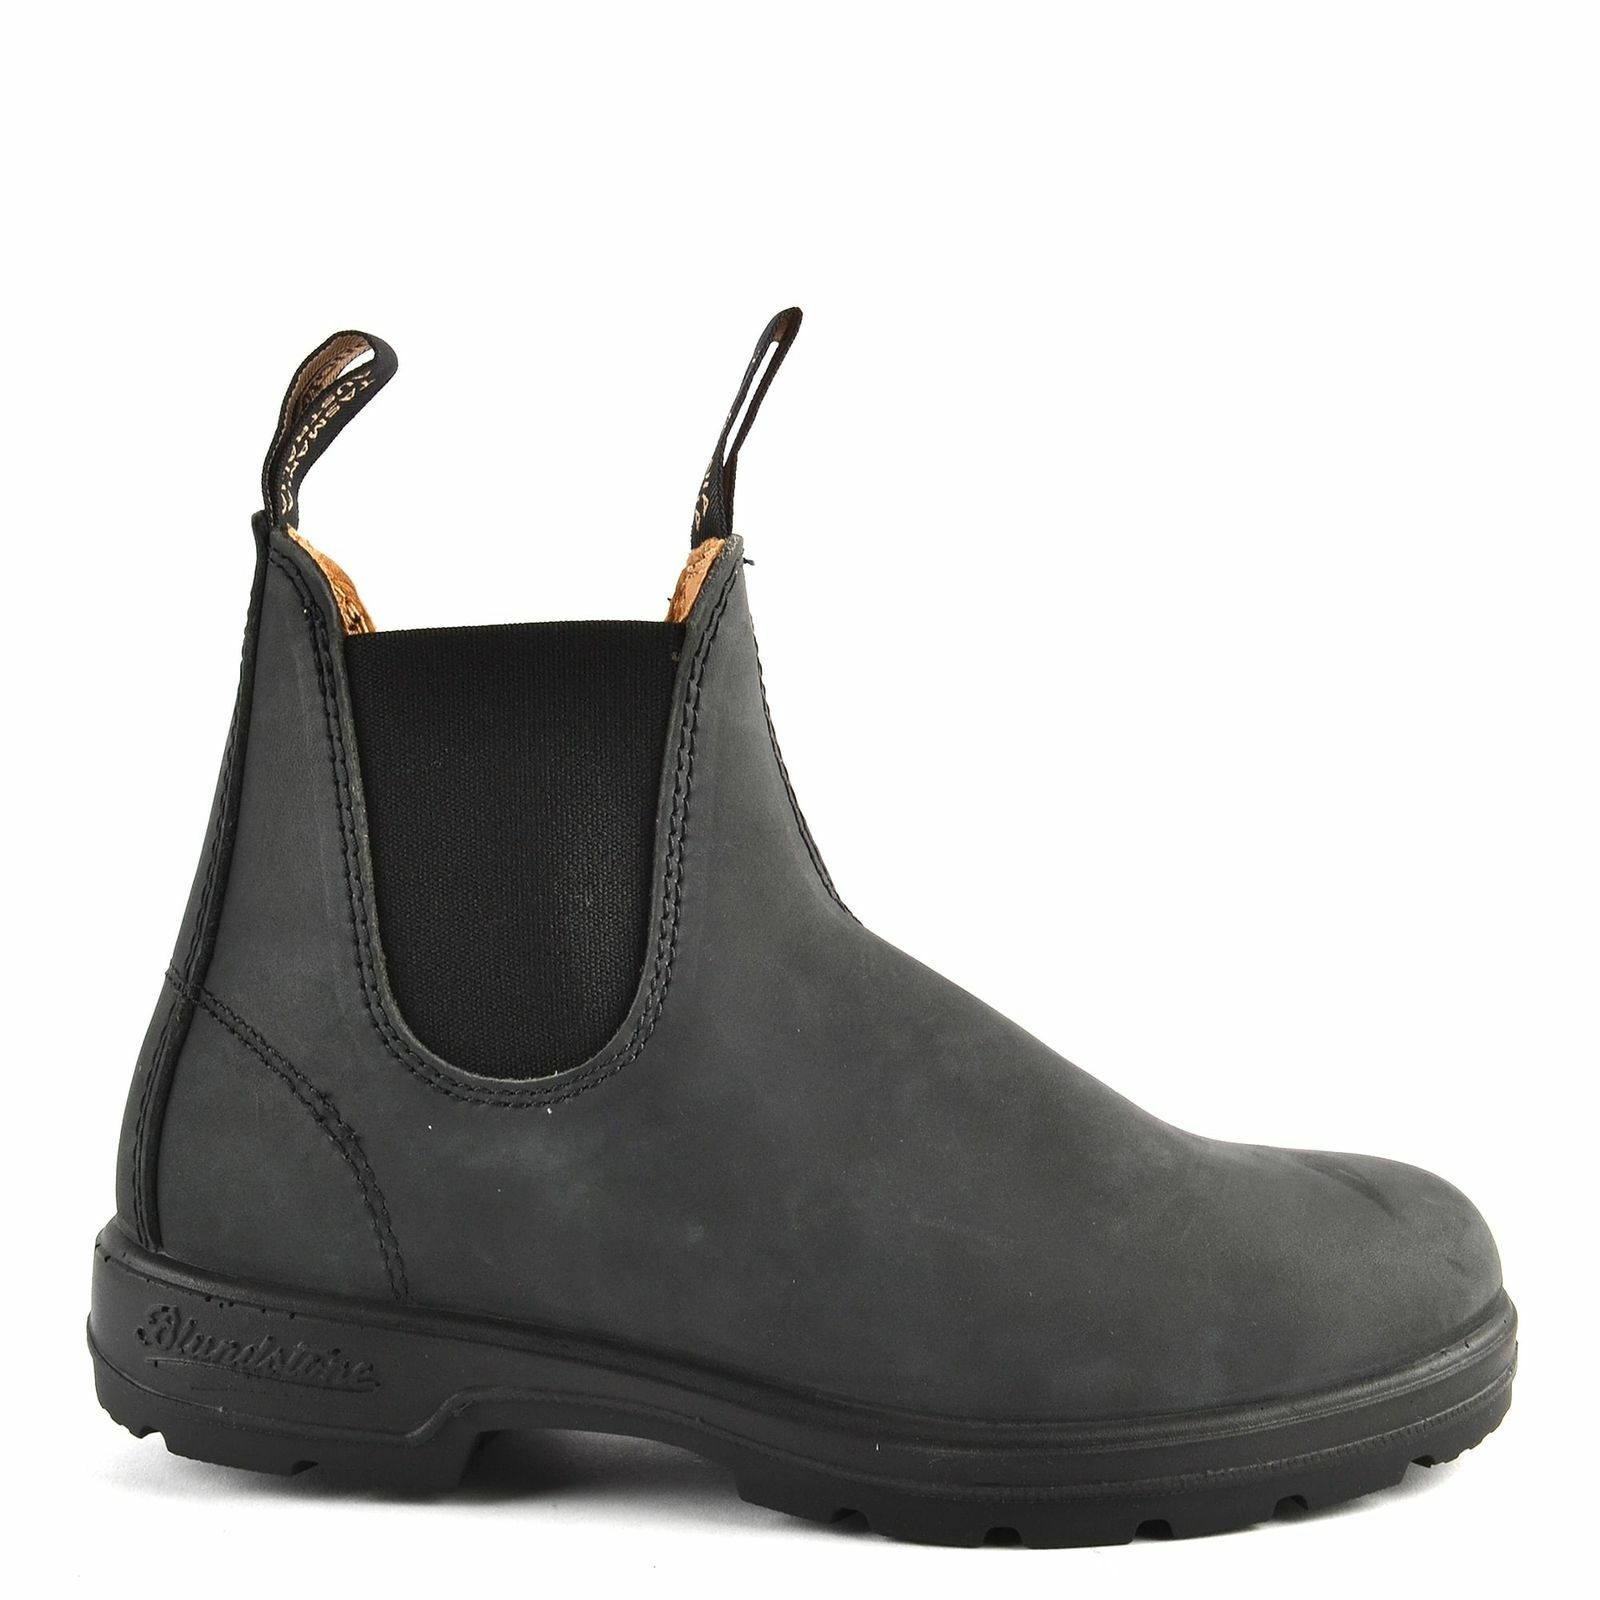 New Blundstone Style 587 Rustic Black Leather Boots For Women